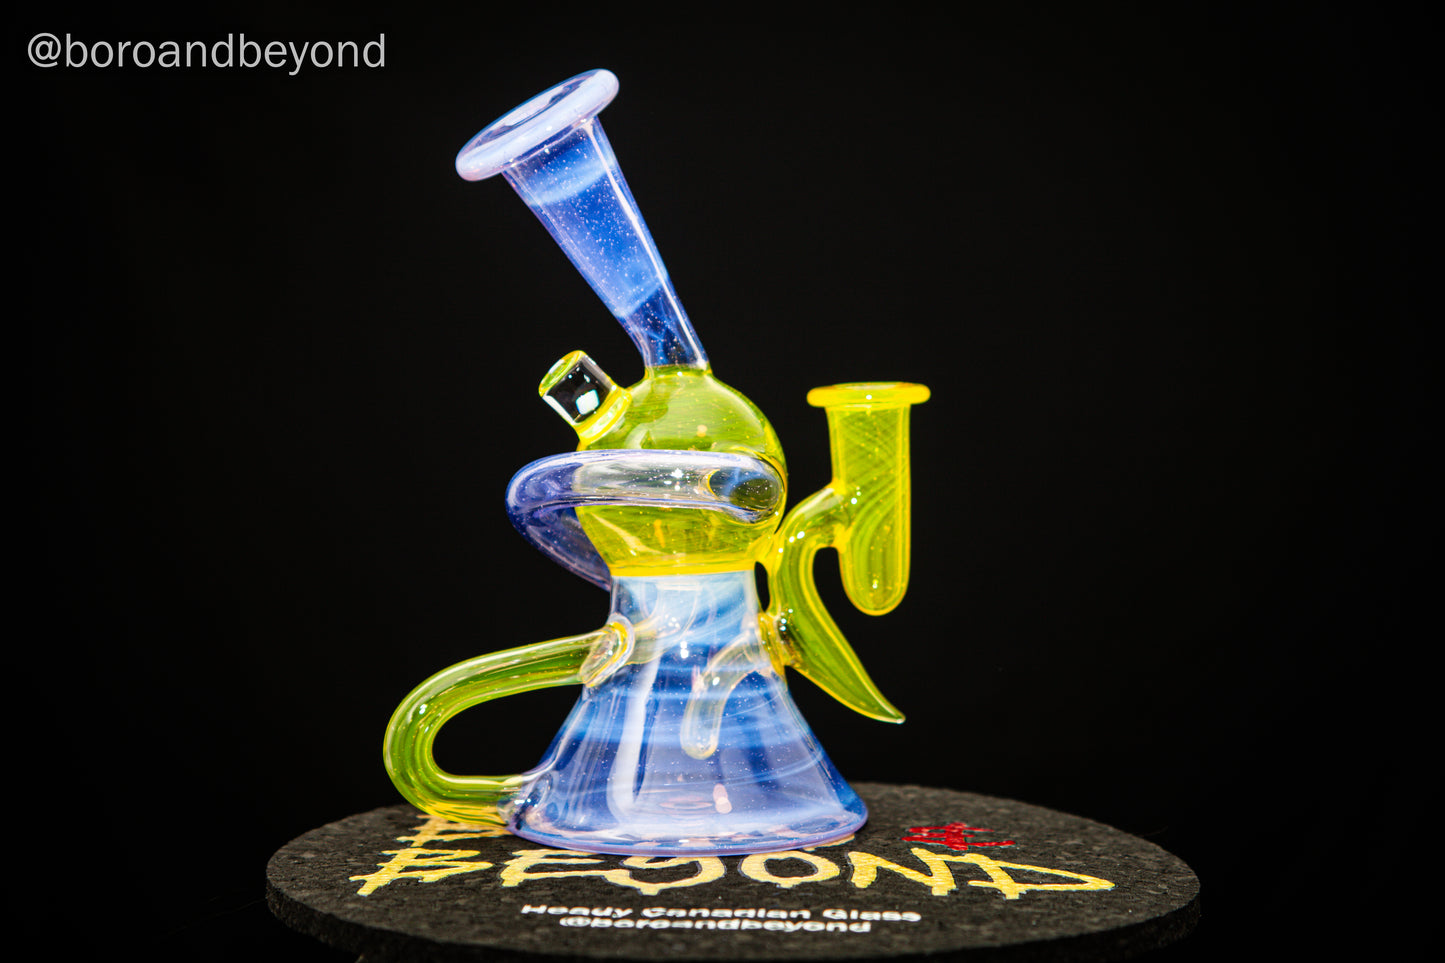 2-Tone Blue/Yellow Recycler